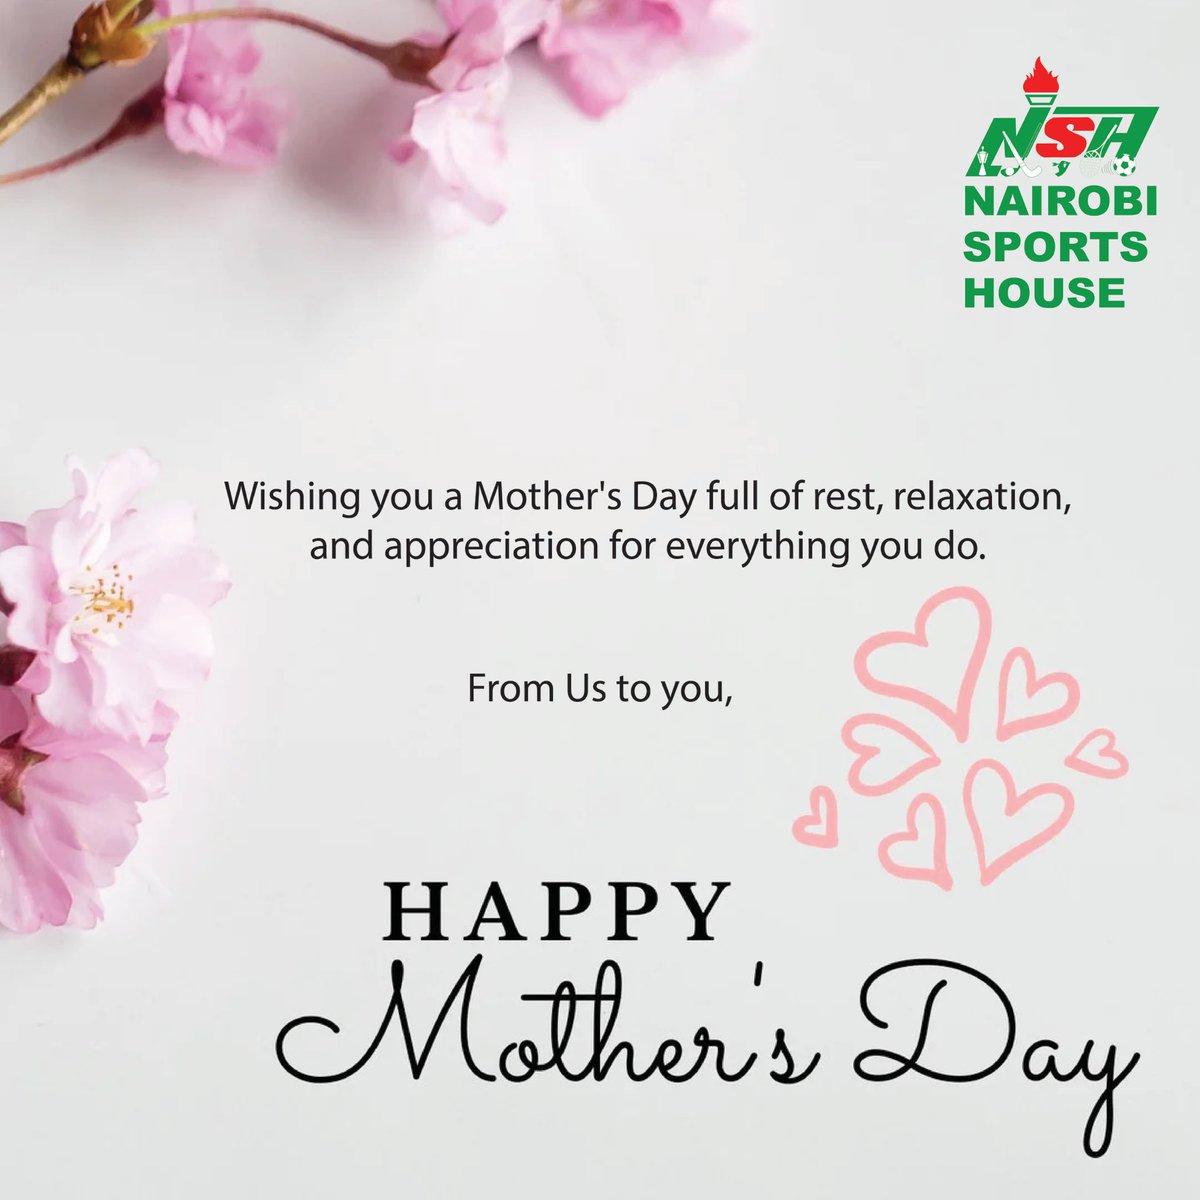 Happy Mother's Day to all the Mom's out there. You are special & you matter alot .🫶🏻🫶🏻 Pass by any of our branches & check out some amazing deals we got going on this special day #nairobisportshouseltd #hometoleadingsportsbrand #MothersDay #mothersdaygift